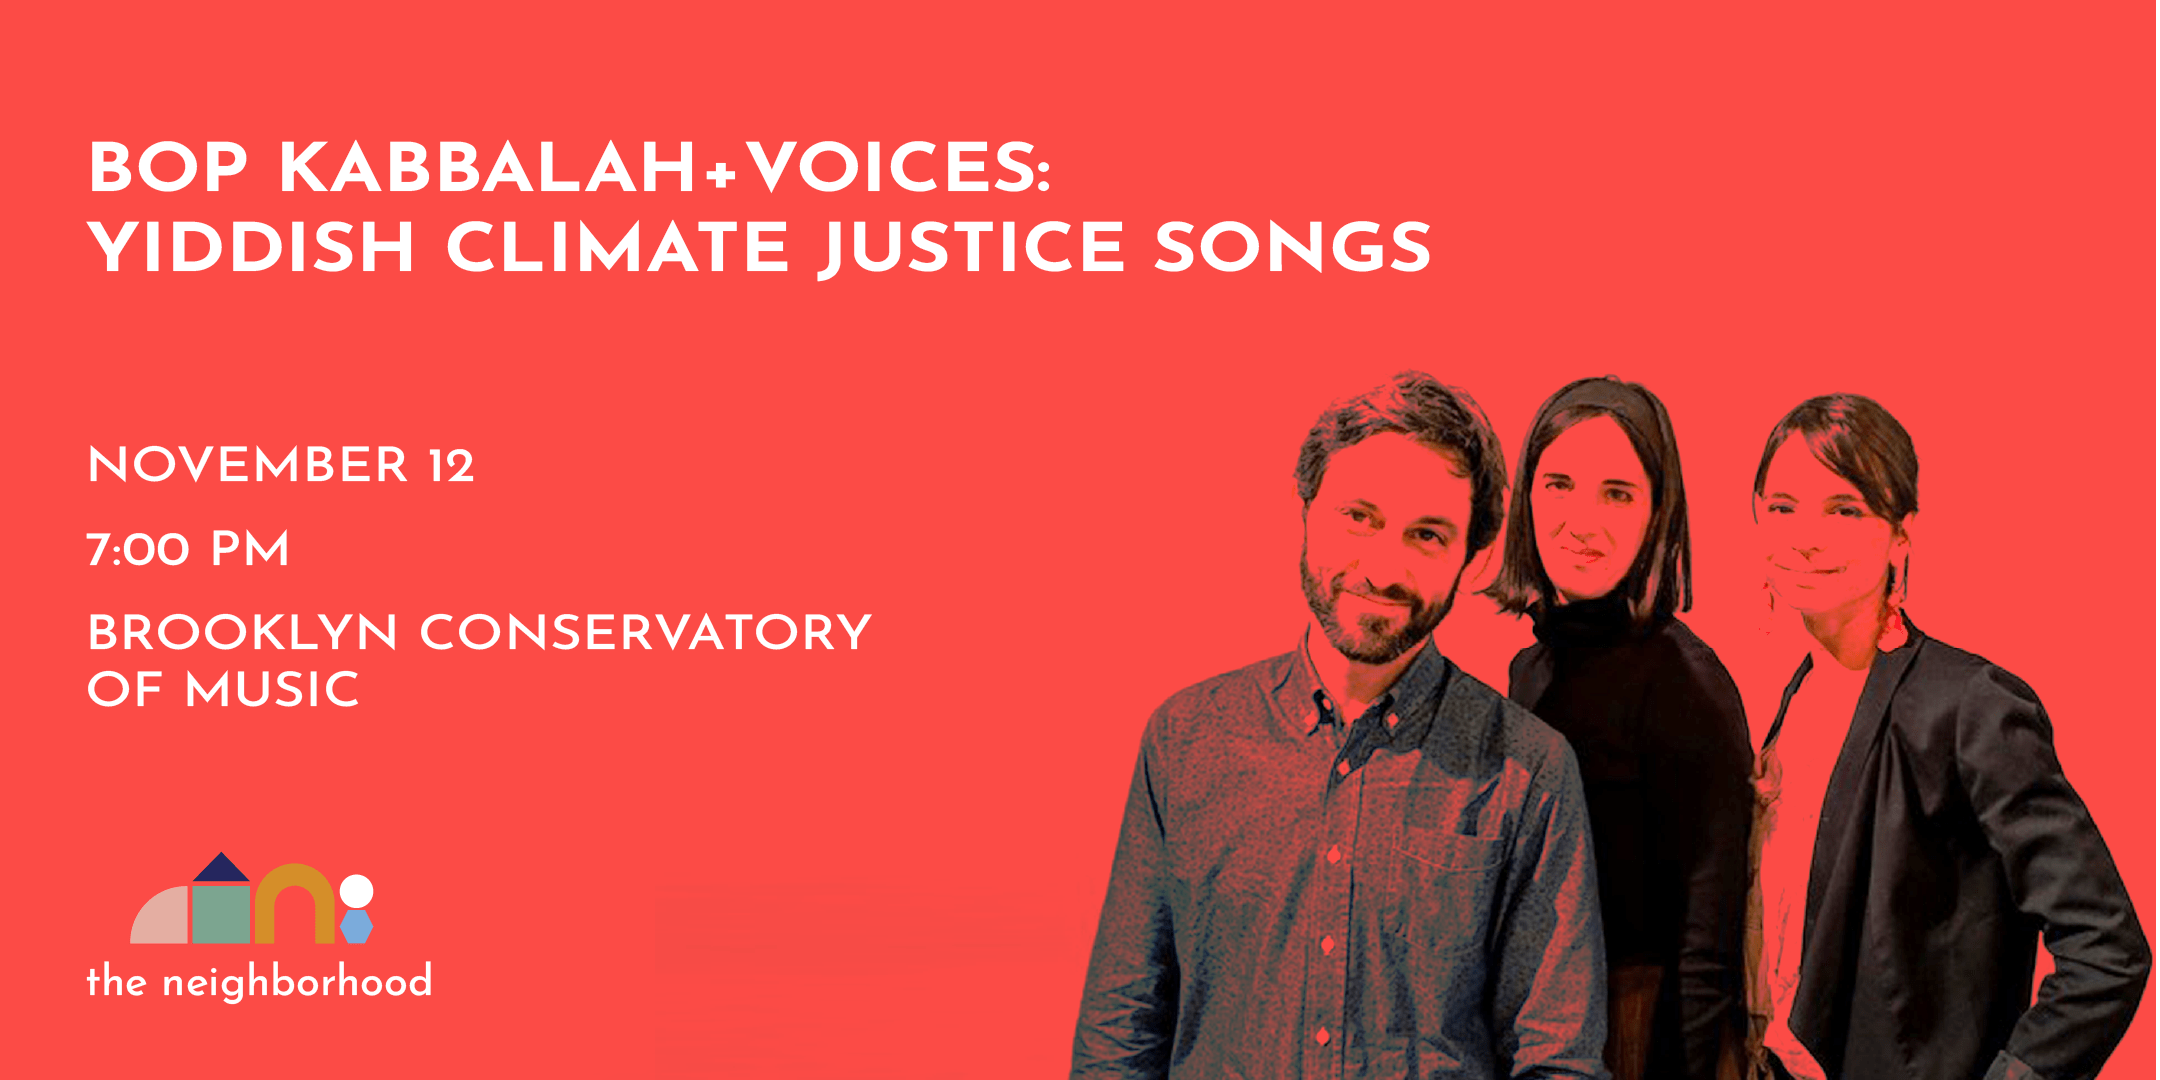 Bop Kabbalah+Voices (with special guest Shayna Dunkelman) premieres Yiddish Climate Justice Song Cycle